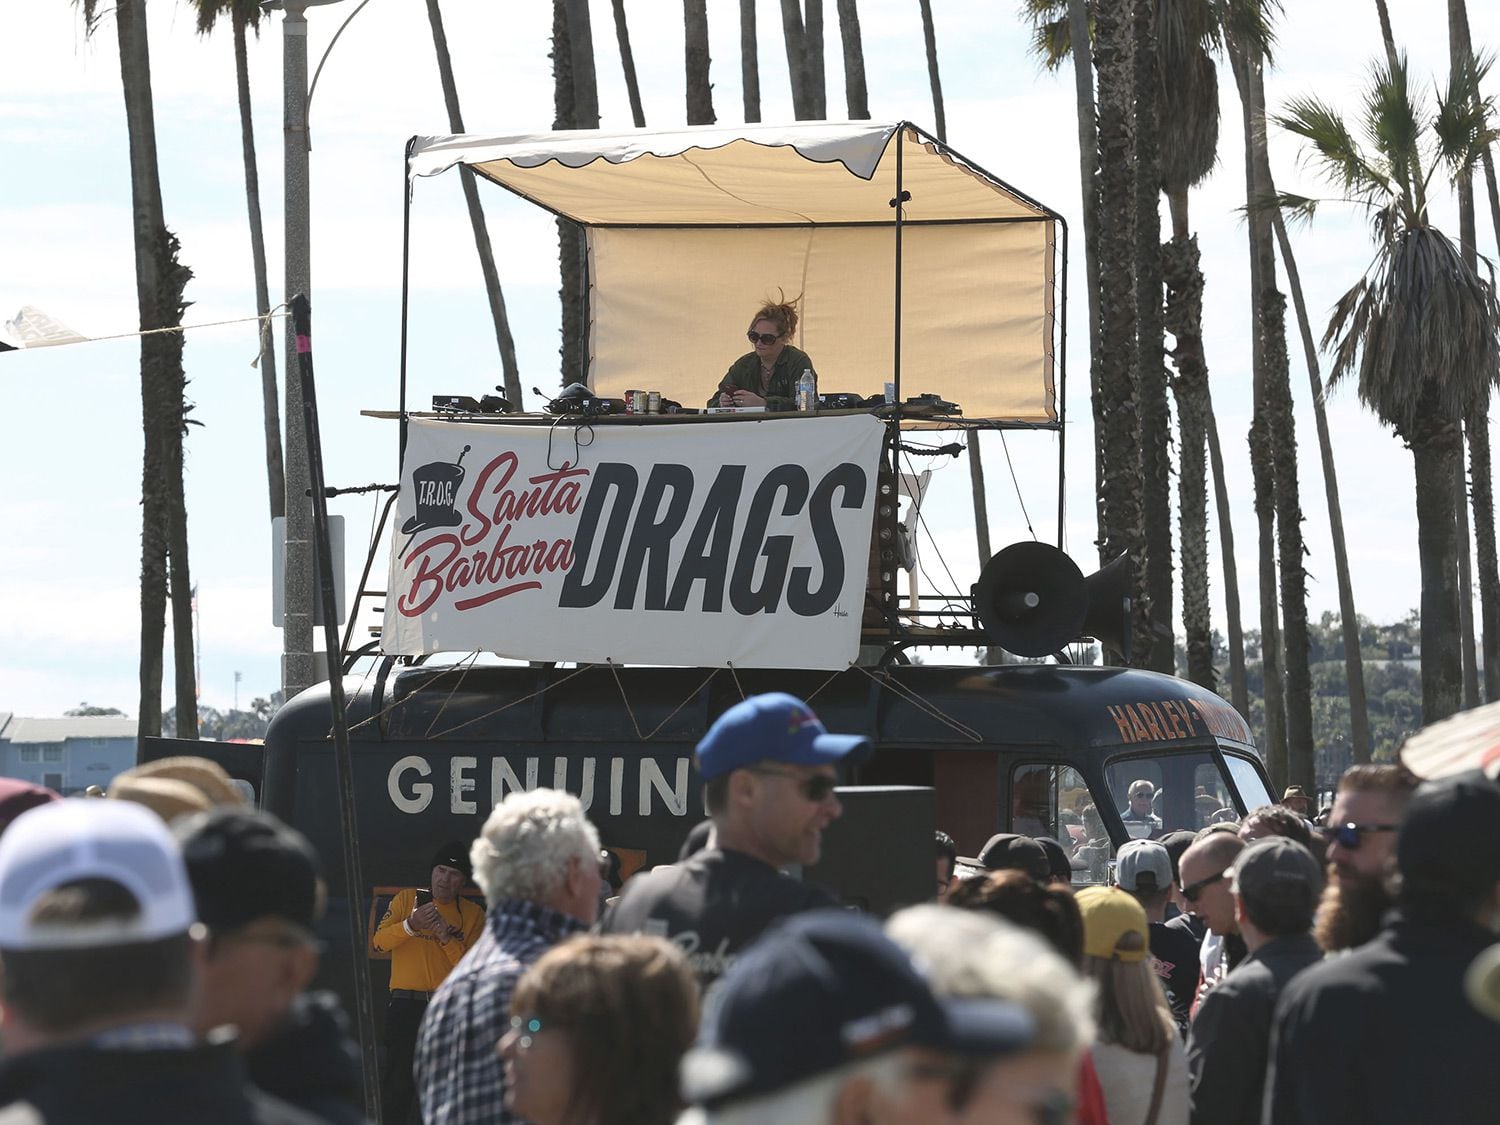 The DJ and announcers' booth sat on an old custom van near the starting line.